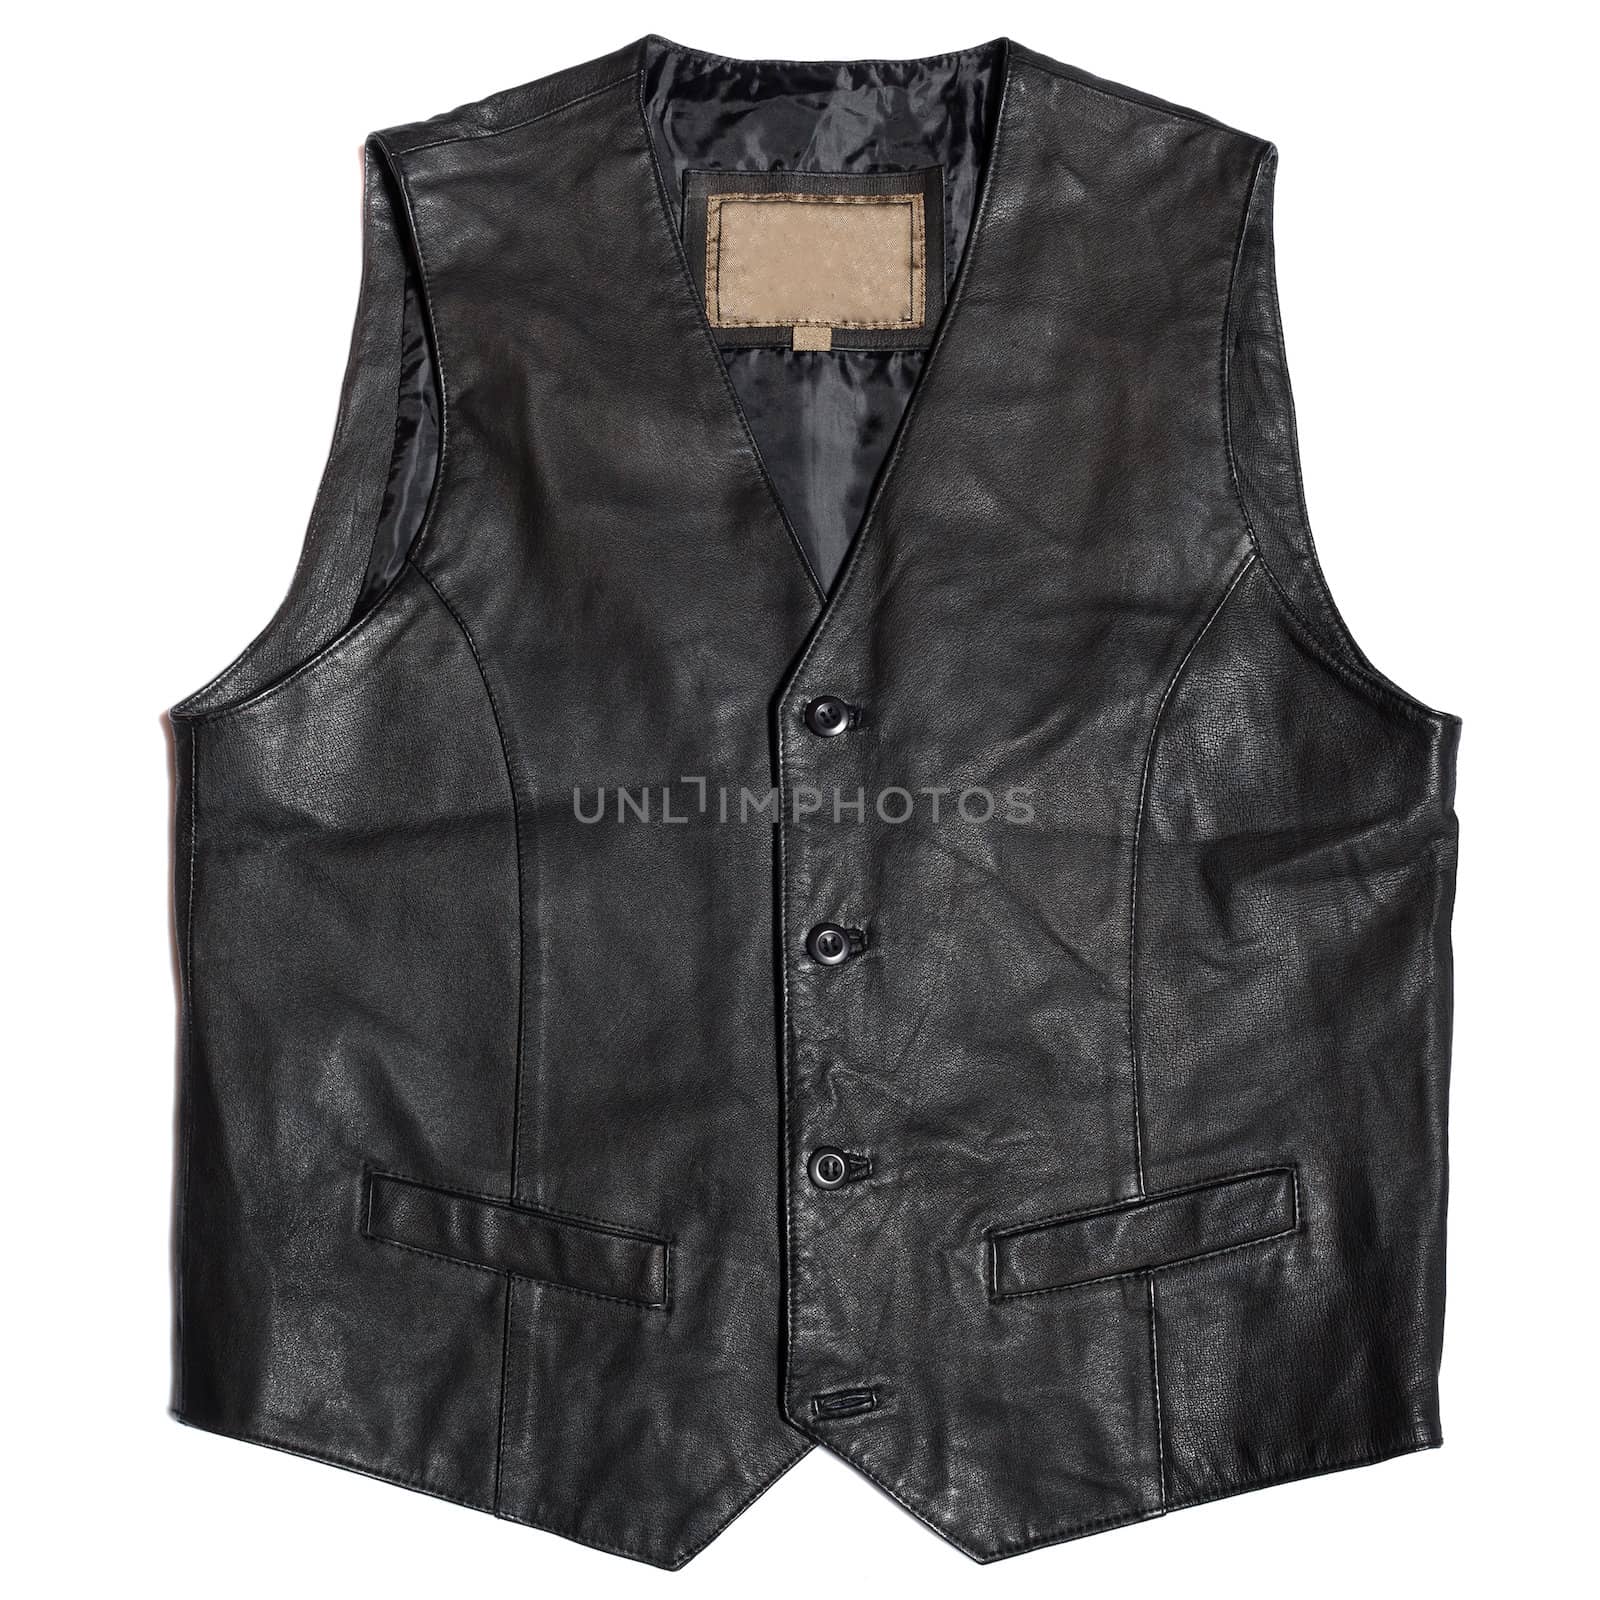 Vintage men's leather waistcoat on a white background